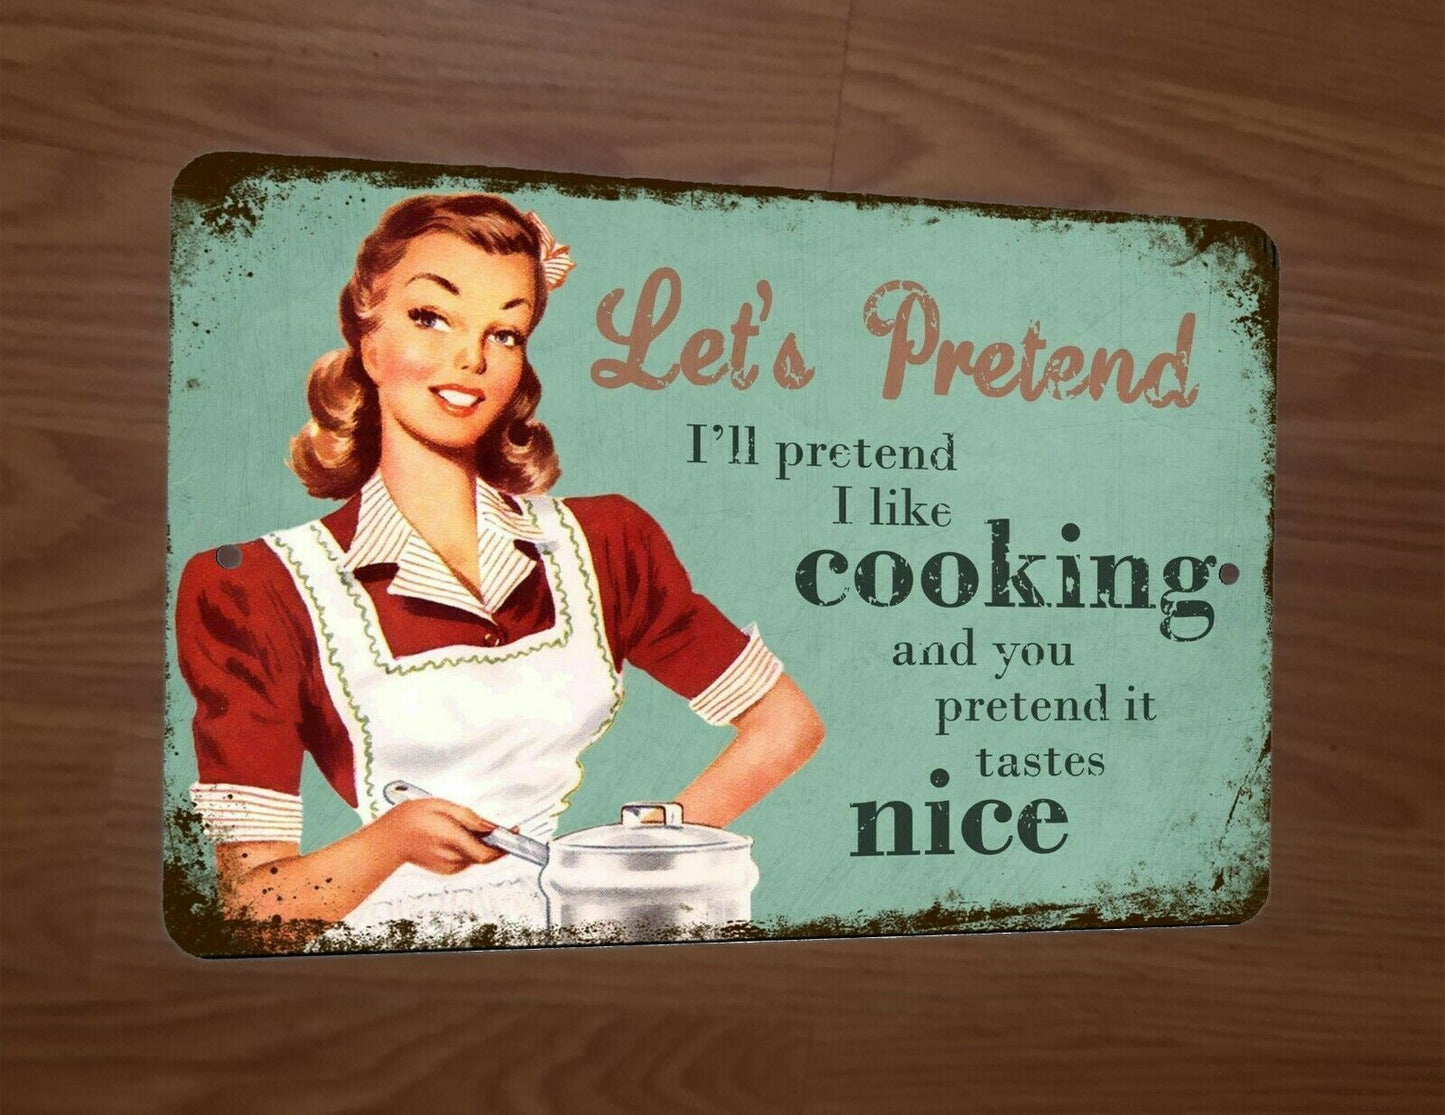 Lets Pretend I like Cooking Funny 8x12 Metal Wall Vintage Misc Poster Sign